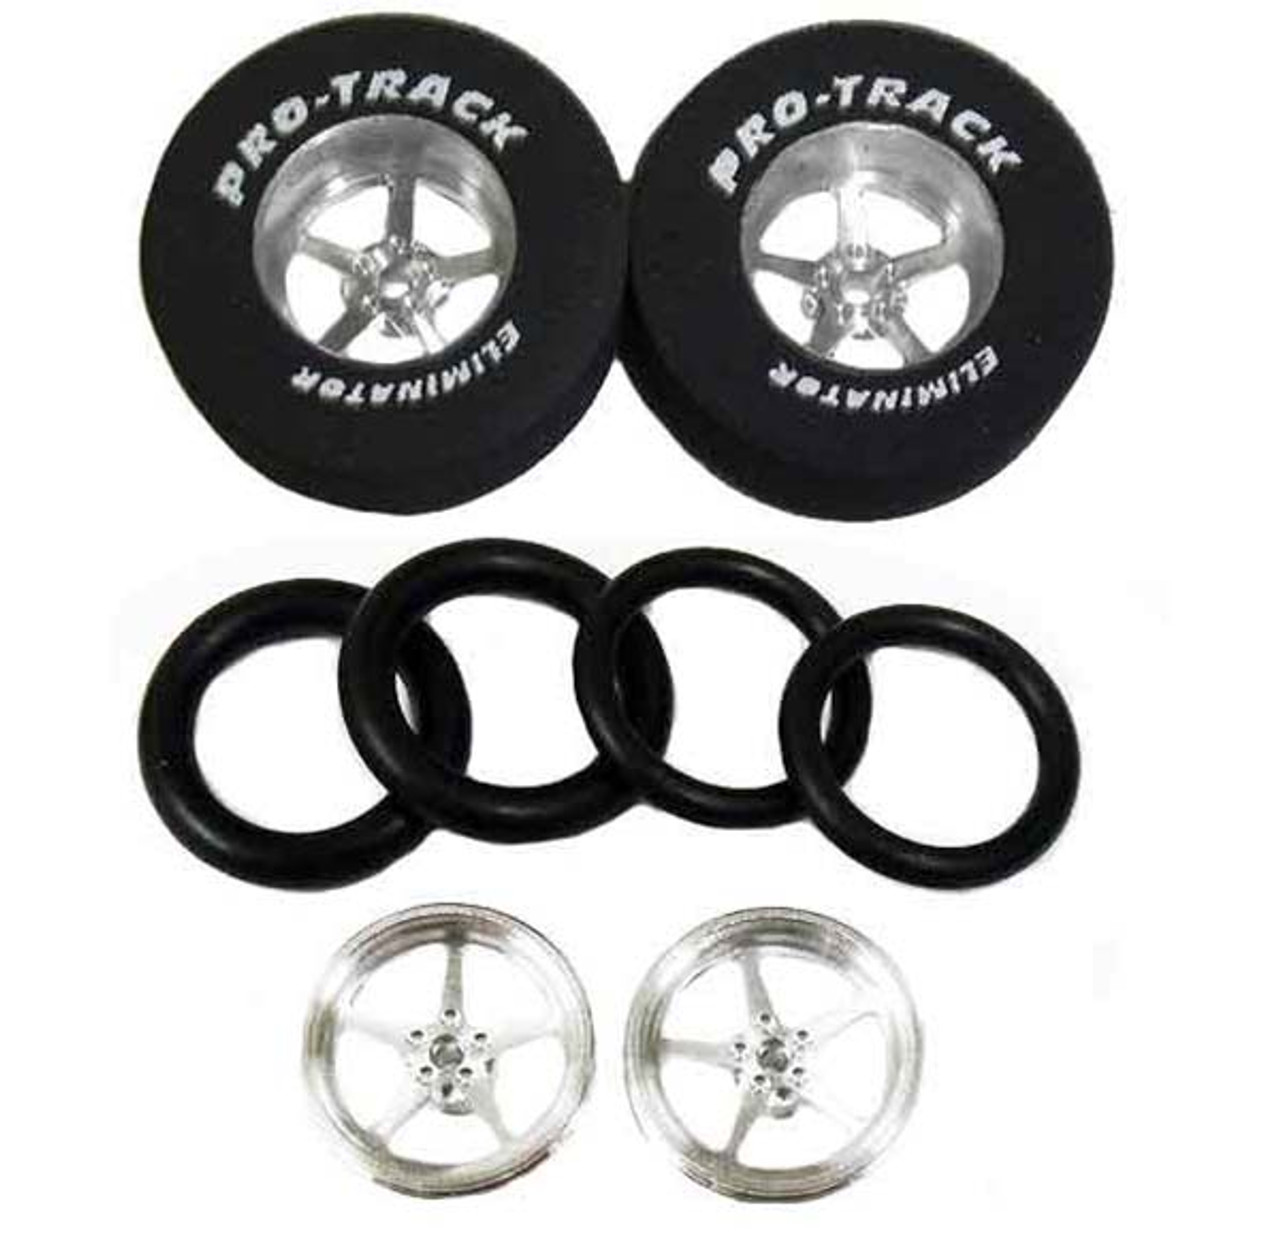 Pro-Track 1 1/16 x 3/32 x .500 wide Rears & Fronts - Style I - PTC-N407I-SET